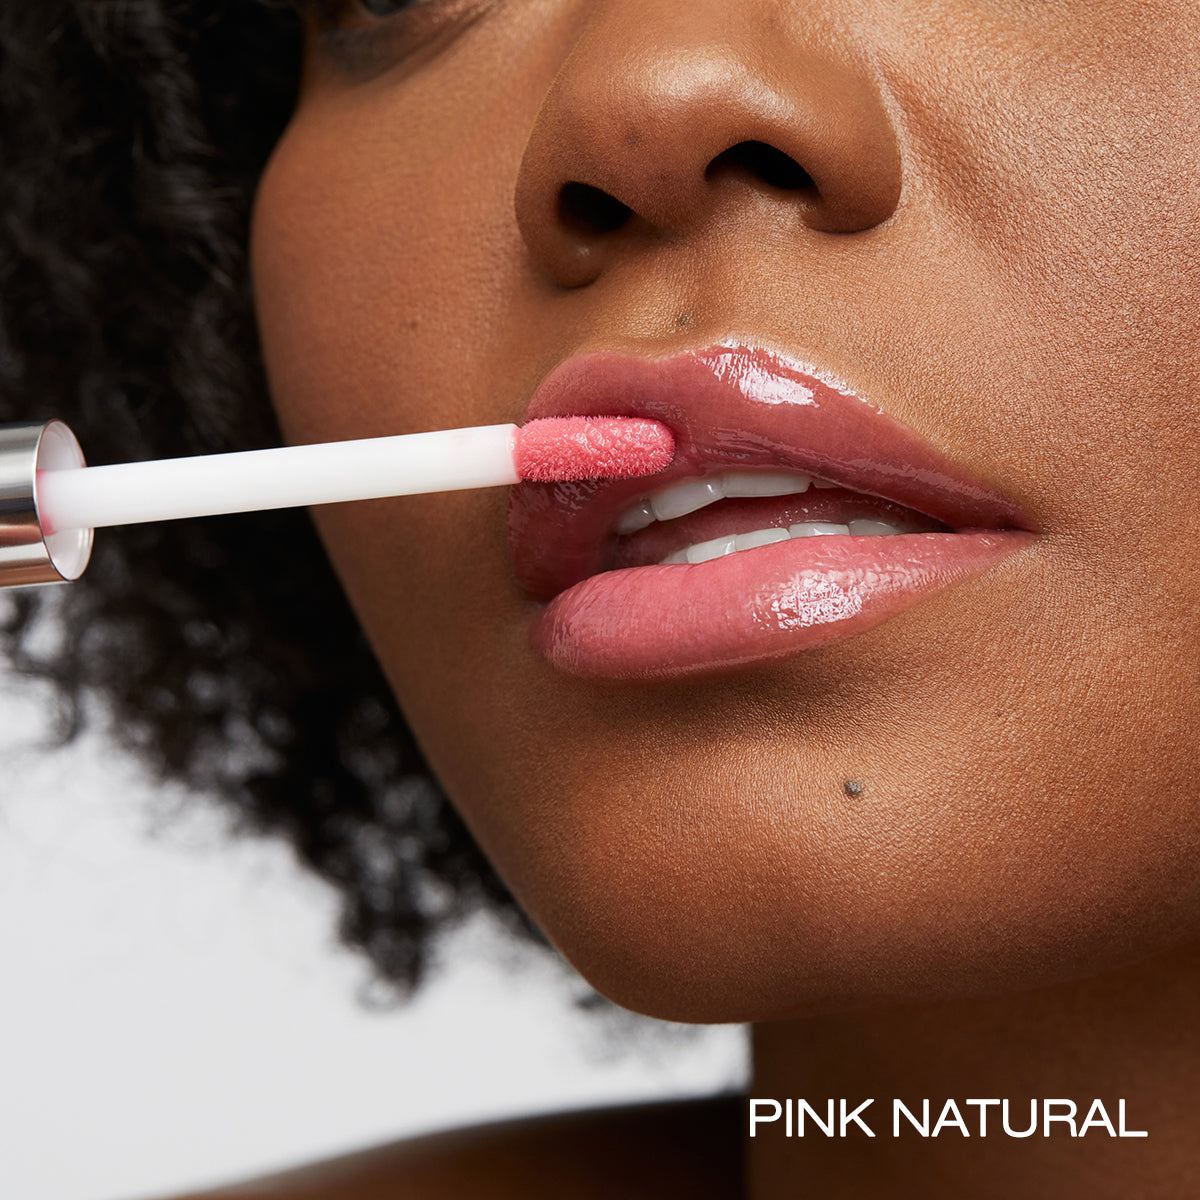 Pink natural spin on lip gloss applied to lips demonstration